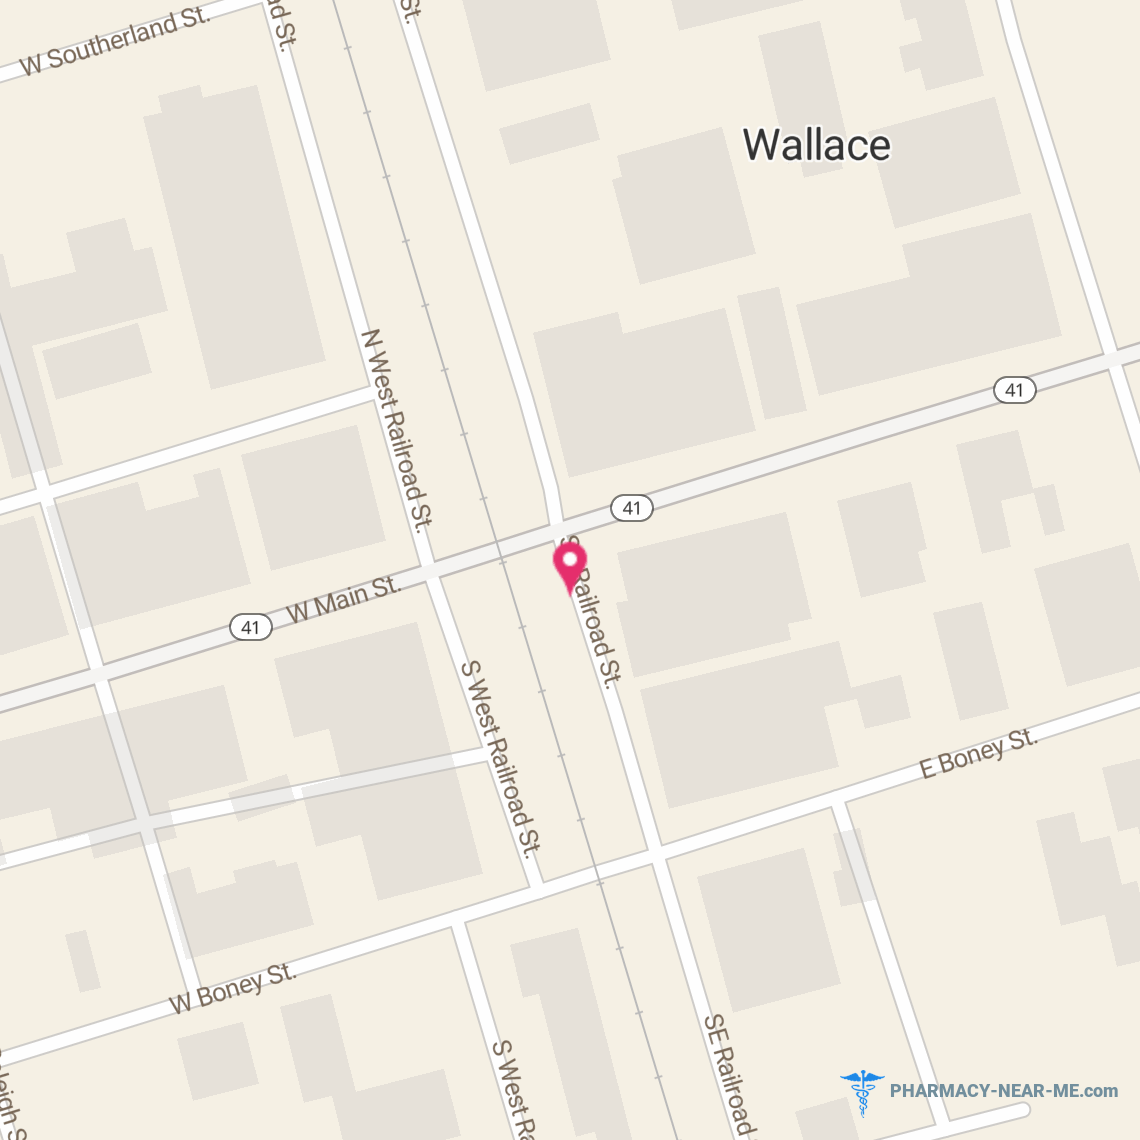 WALLACE DRUG CO INC - Pharmacy Hours, Phone, Reviews & Information: 100 West Main Street, Wallace, North Carolina 28466, United States